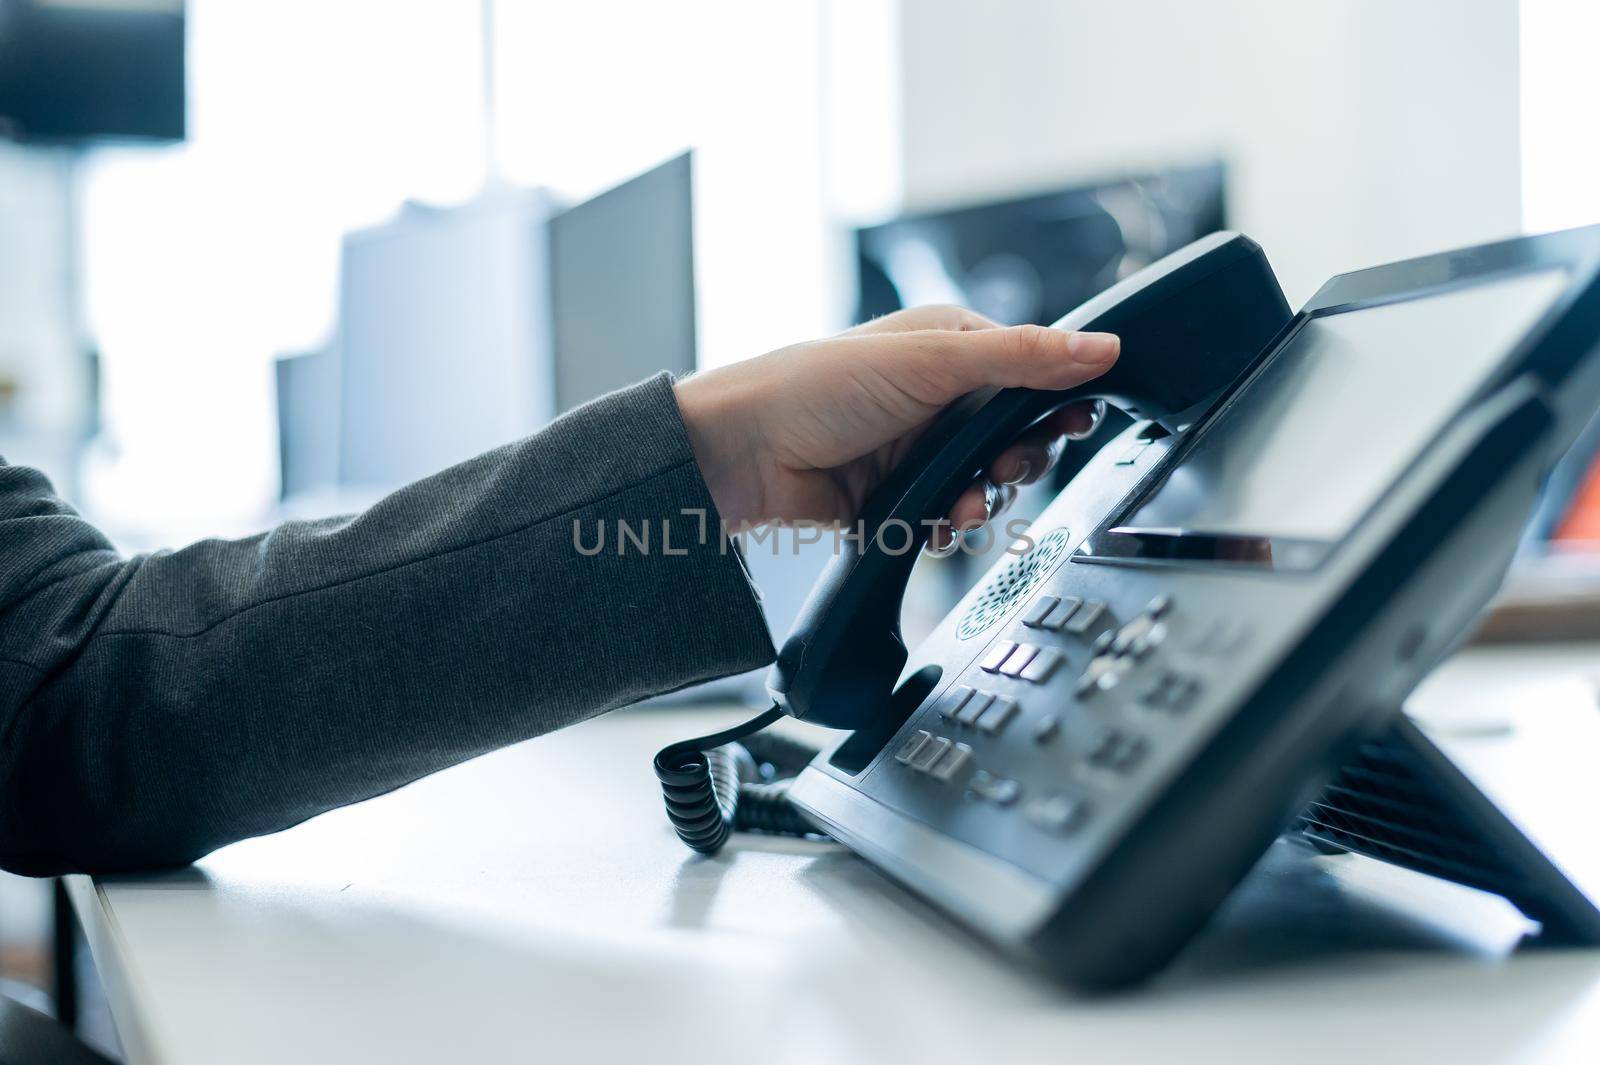 Closeup female hand on landline phone in office. Faceless woman in a suit works as a receptionist answering the phone to customer calls. by mrwed54